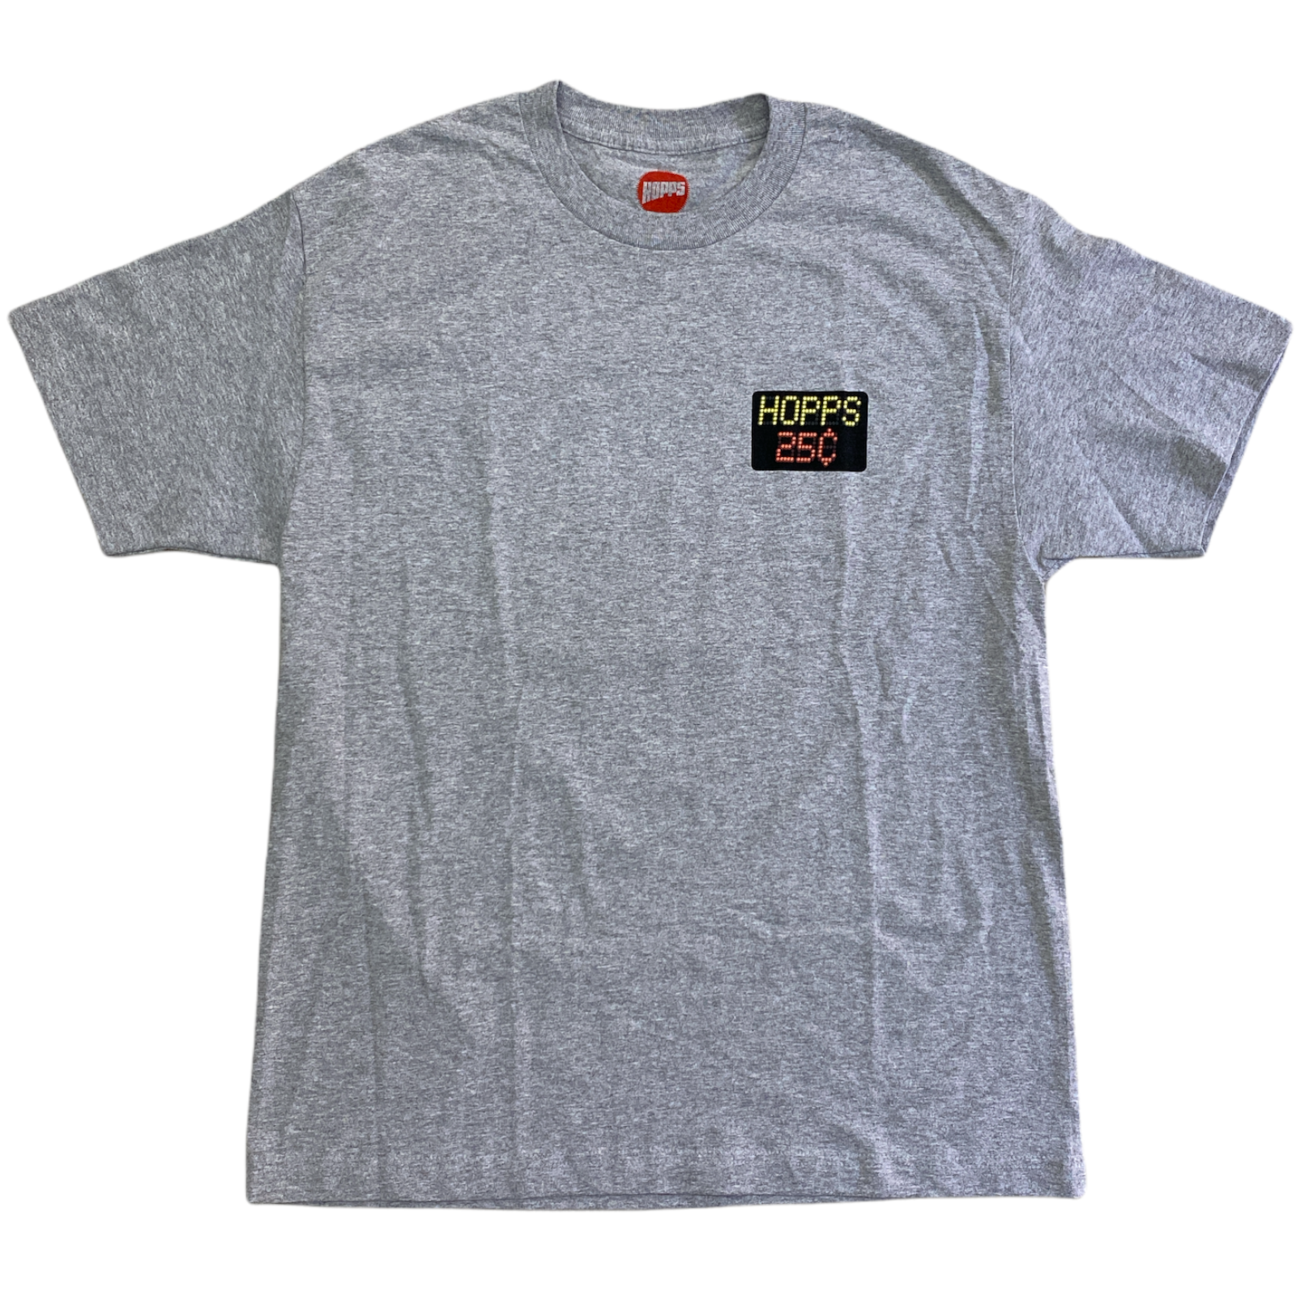 Hopps X QS Snackman S/S Tee Shirt Heather Gry (size options listed)